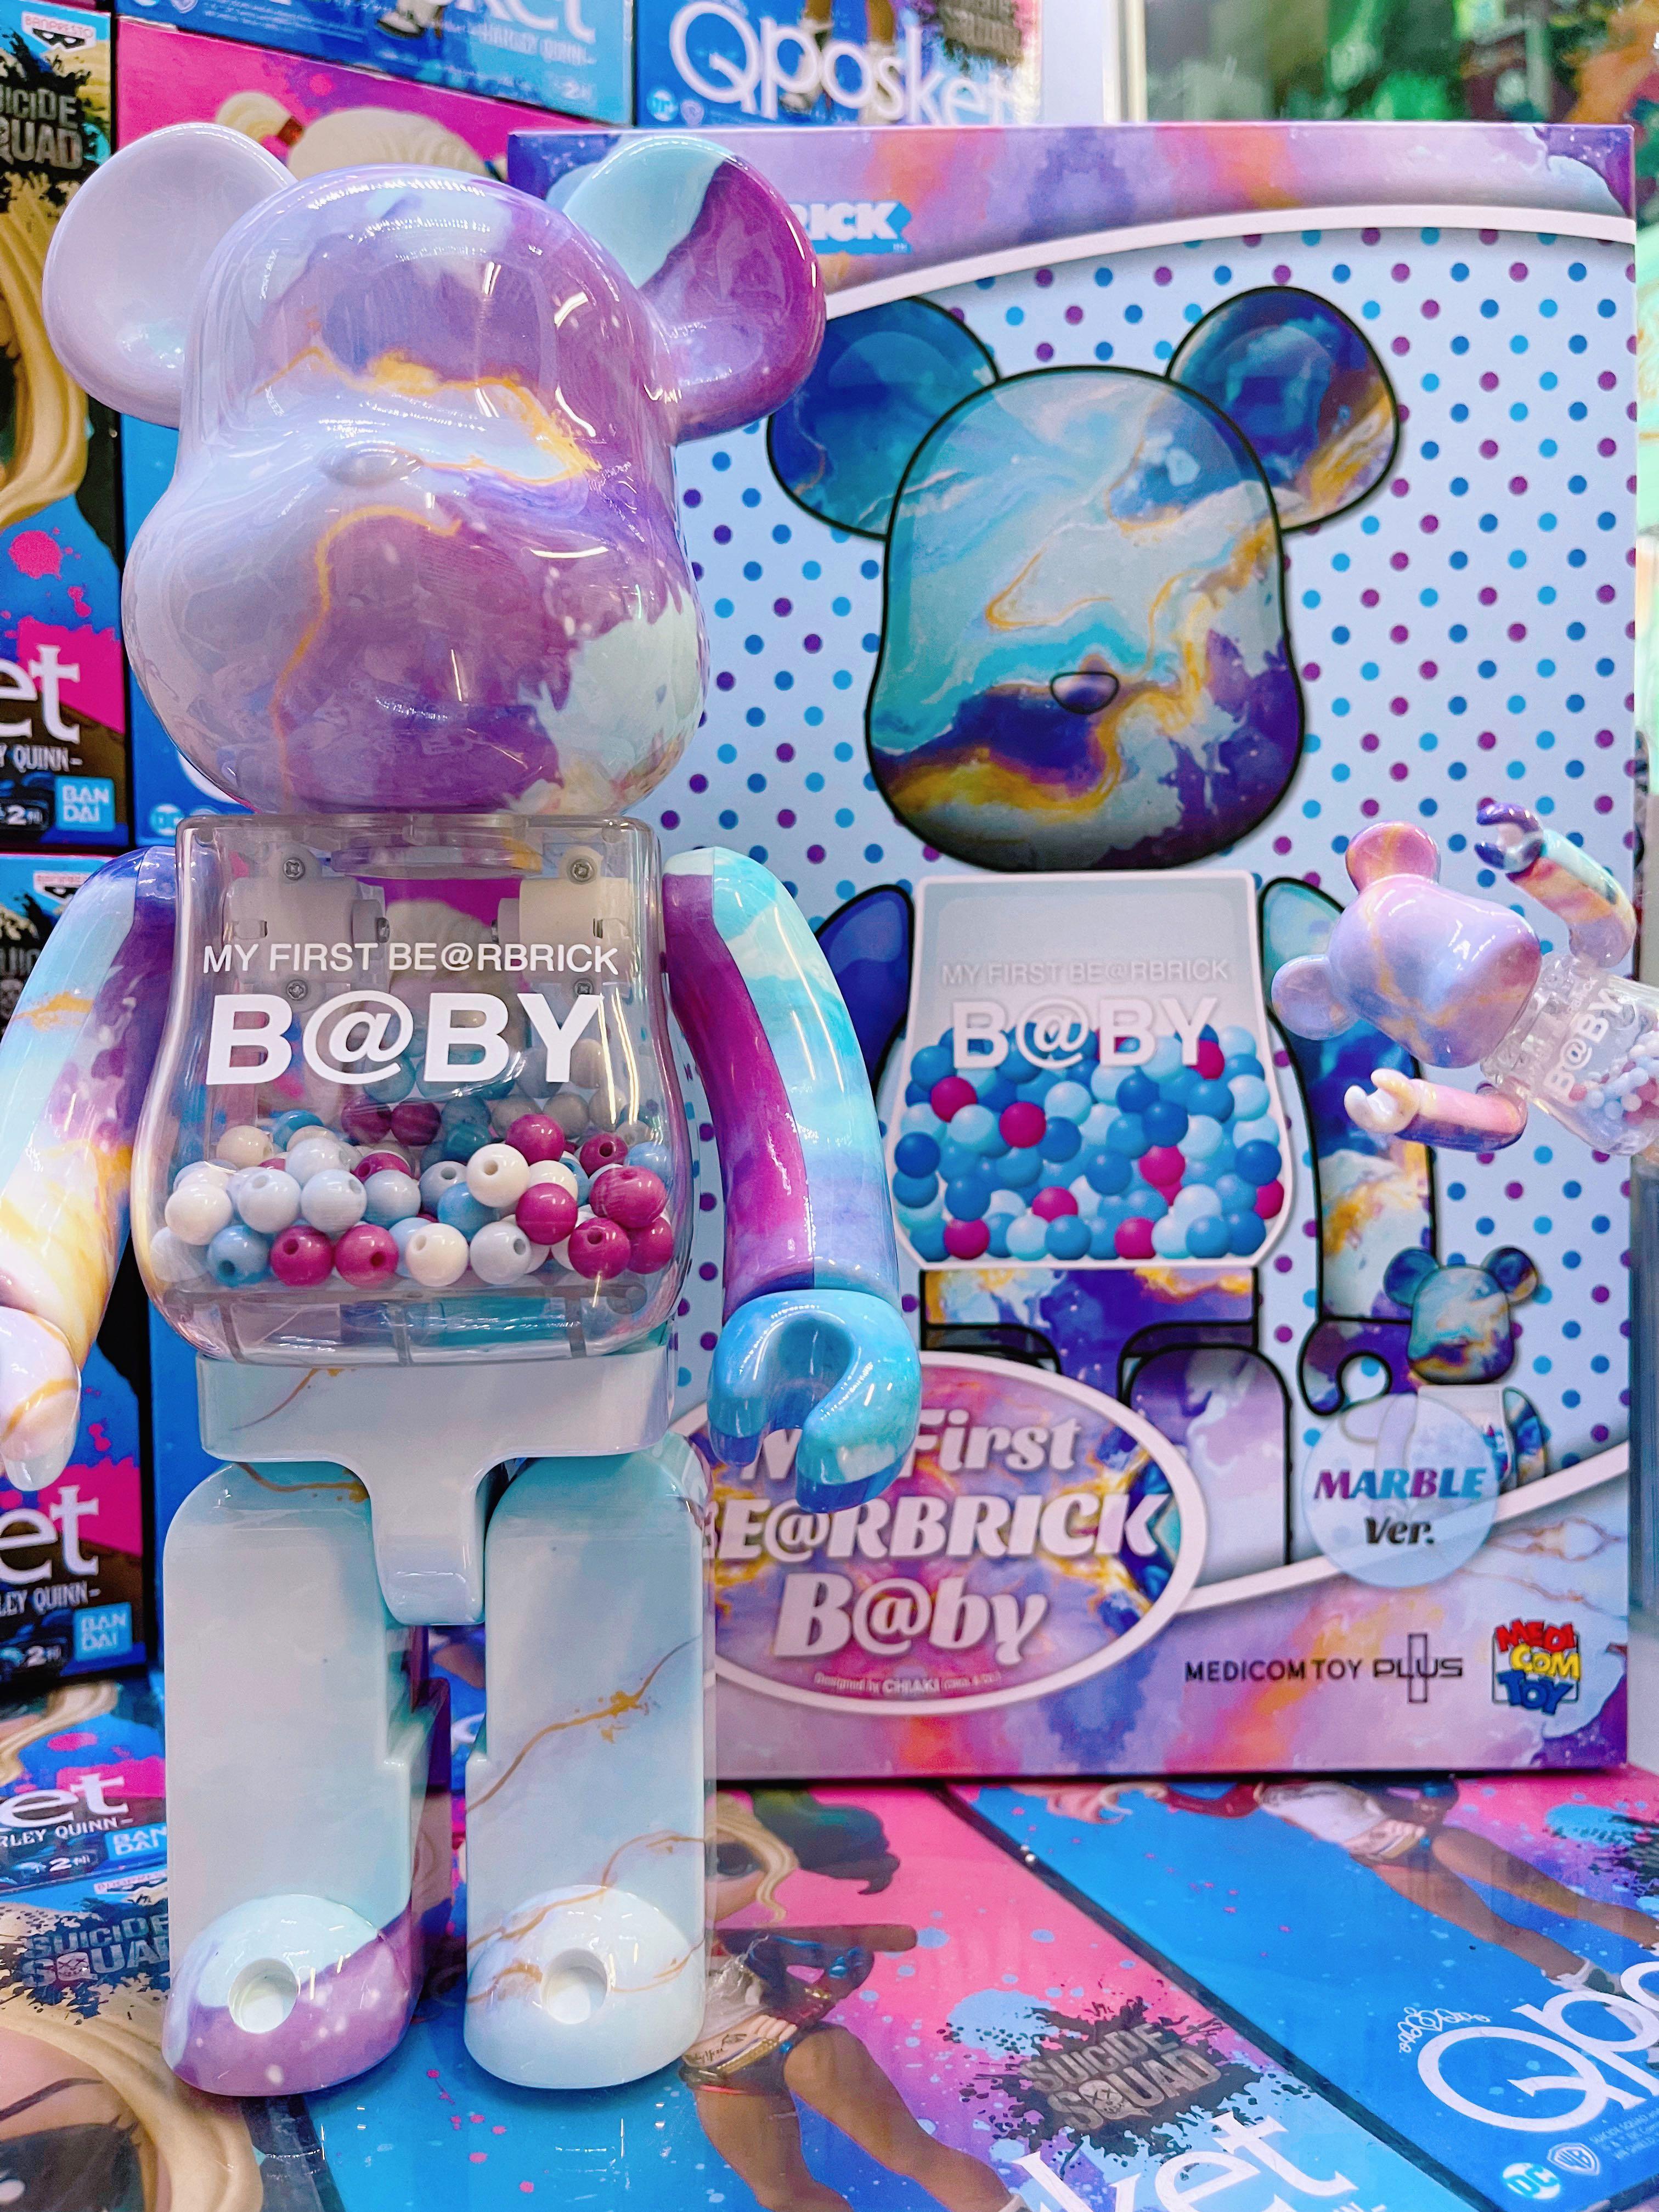 KOAOISORA 2022 MEDICOM TOY ☆ MY FIRST BE@RBRICK x B@BY MARBLE Ver